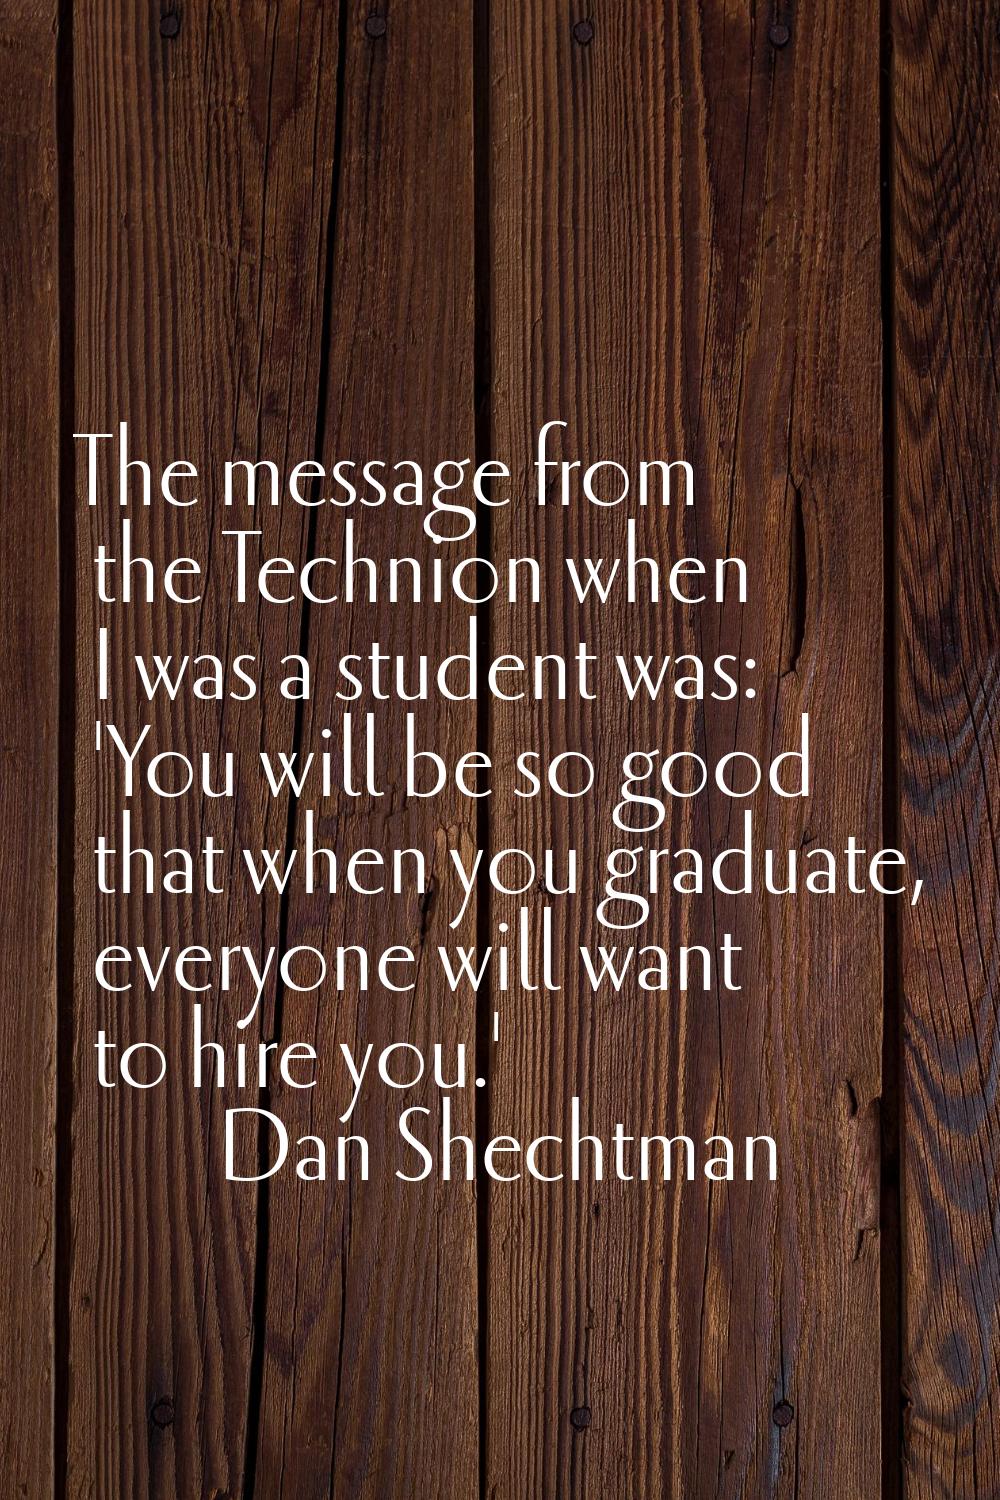 The message from the Technion when I was a student was: 'You will be so good that when you graduate